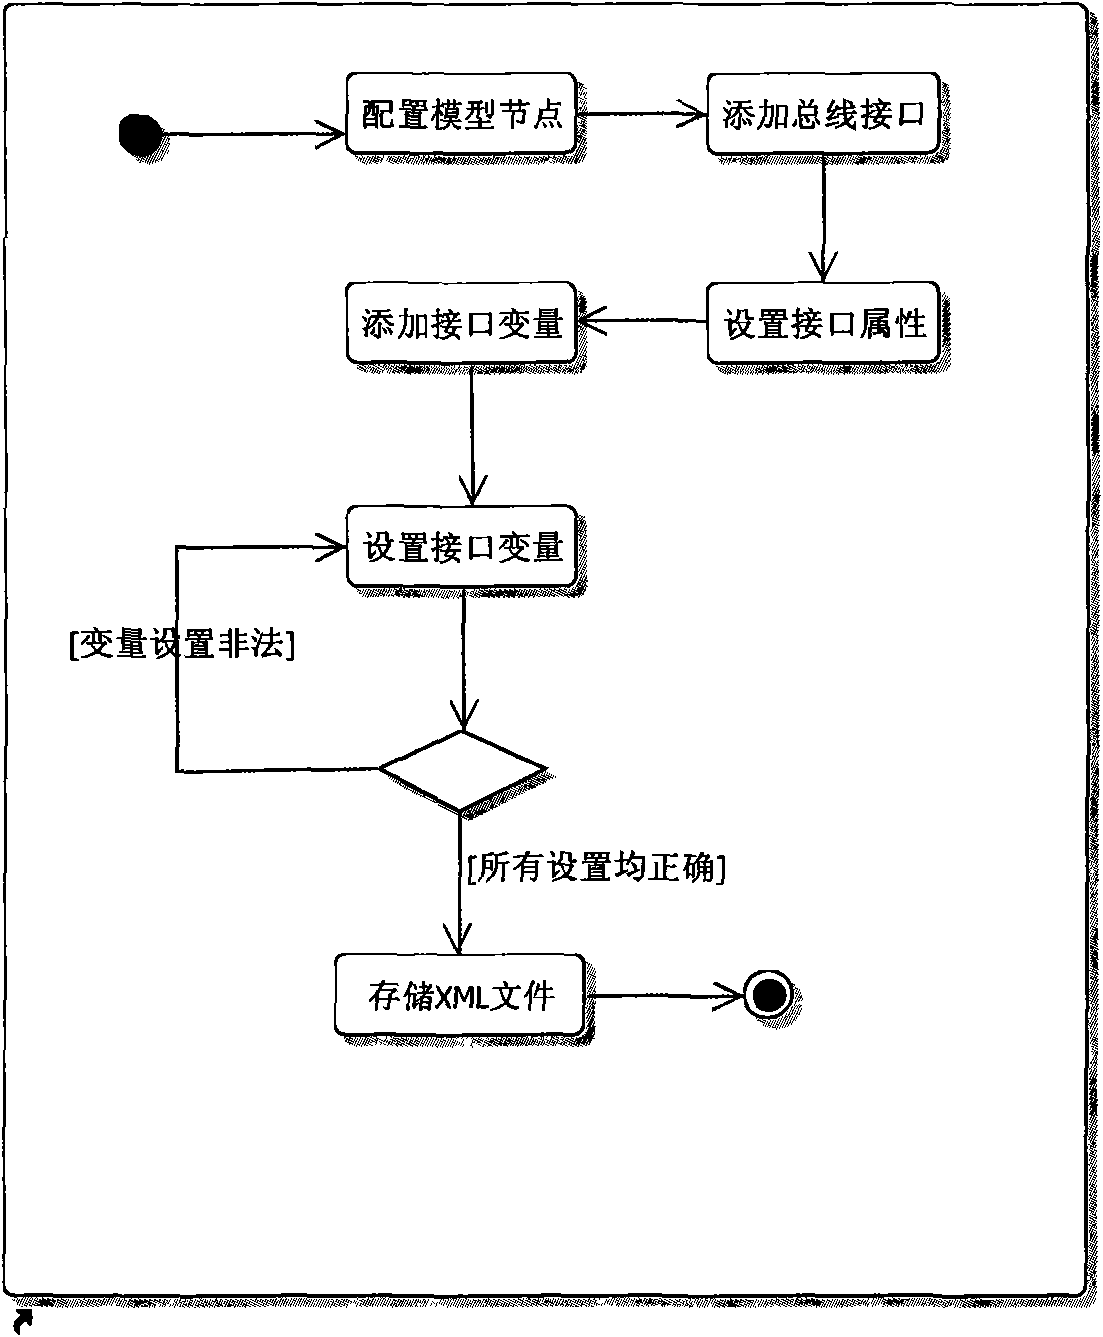 Automatic detection system of embedded type system based on testing script technique